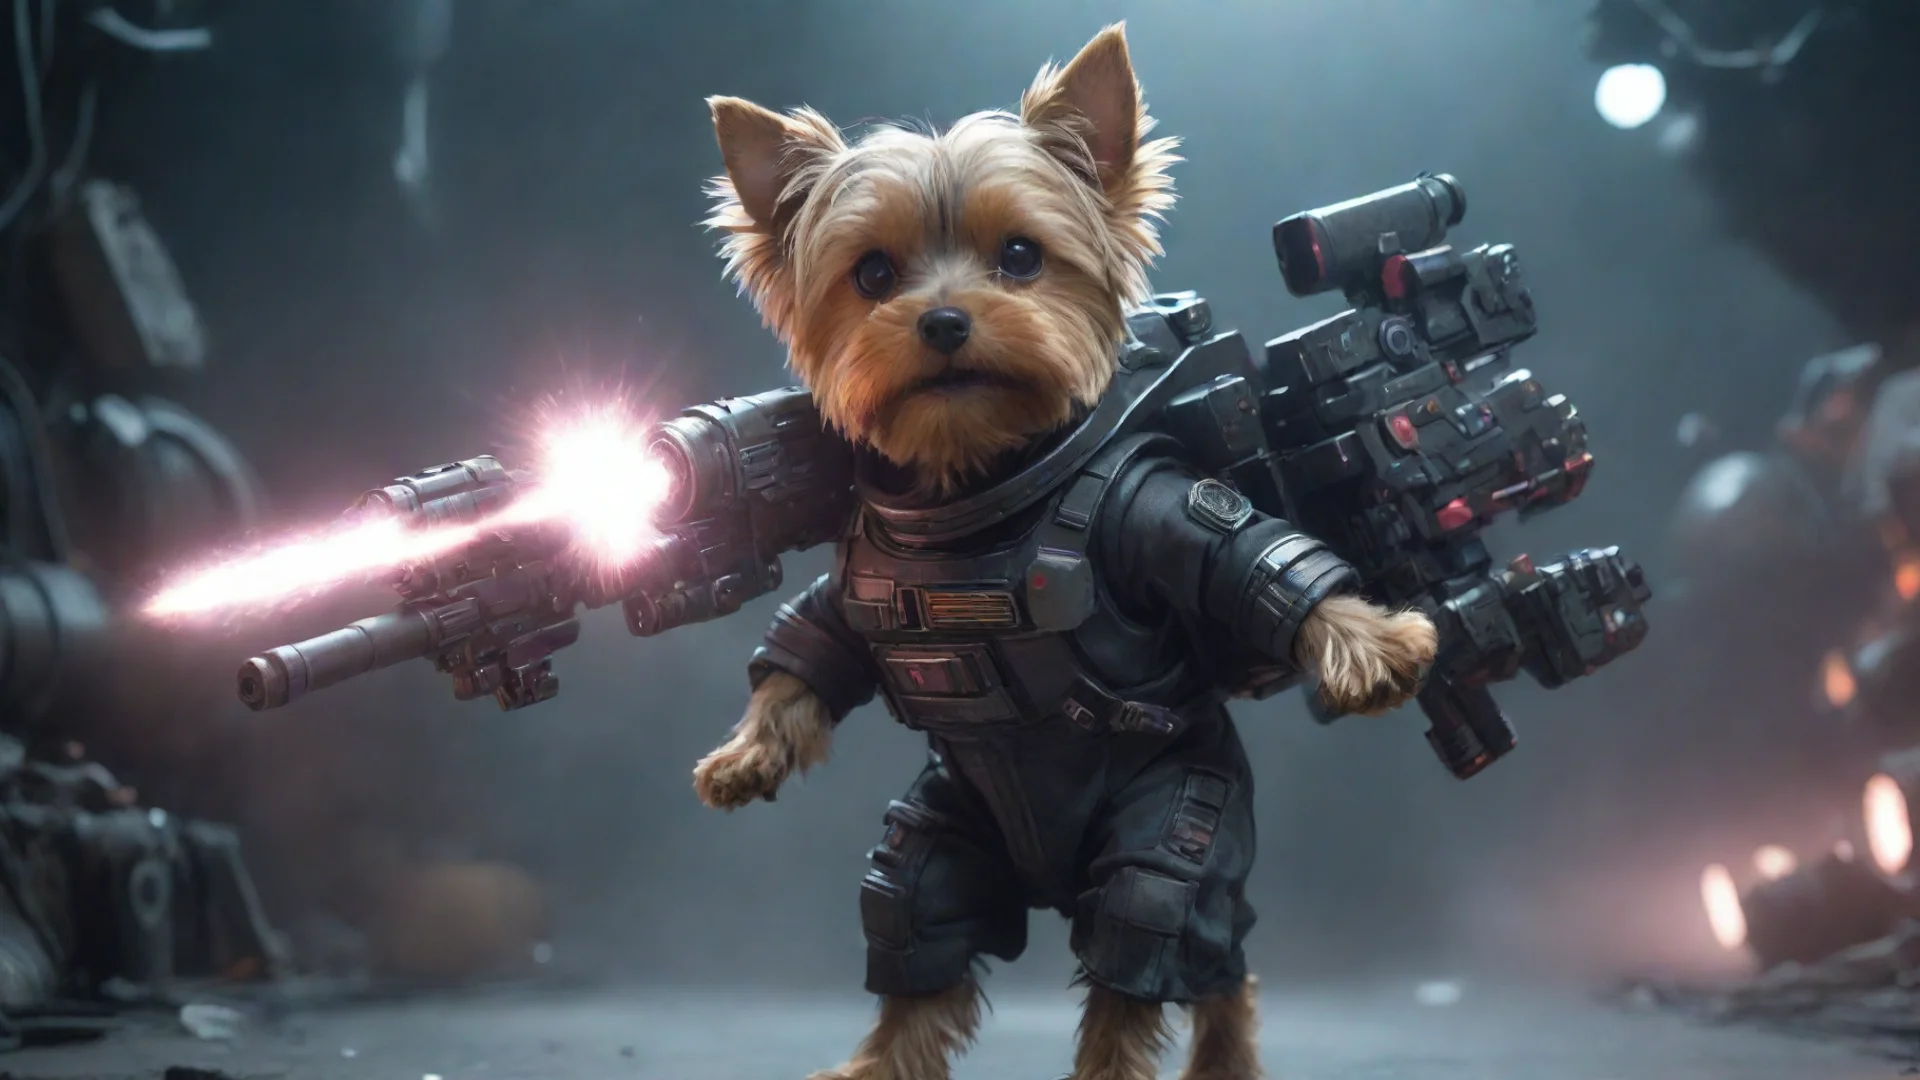 amazing aione yorkshire terrier in a cyberpunk space suit firing big weapon lot lighting awesome portrait 2 wide